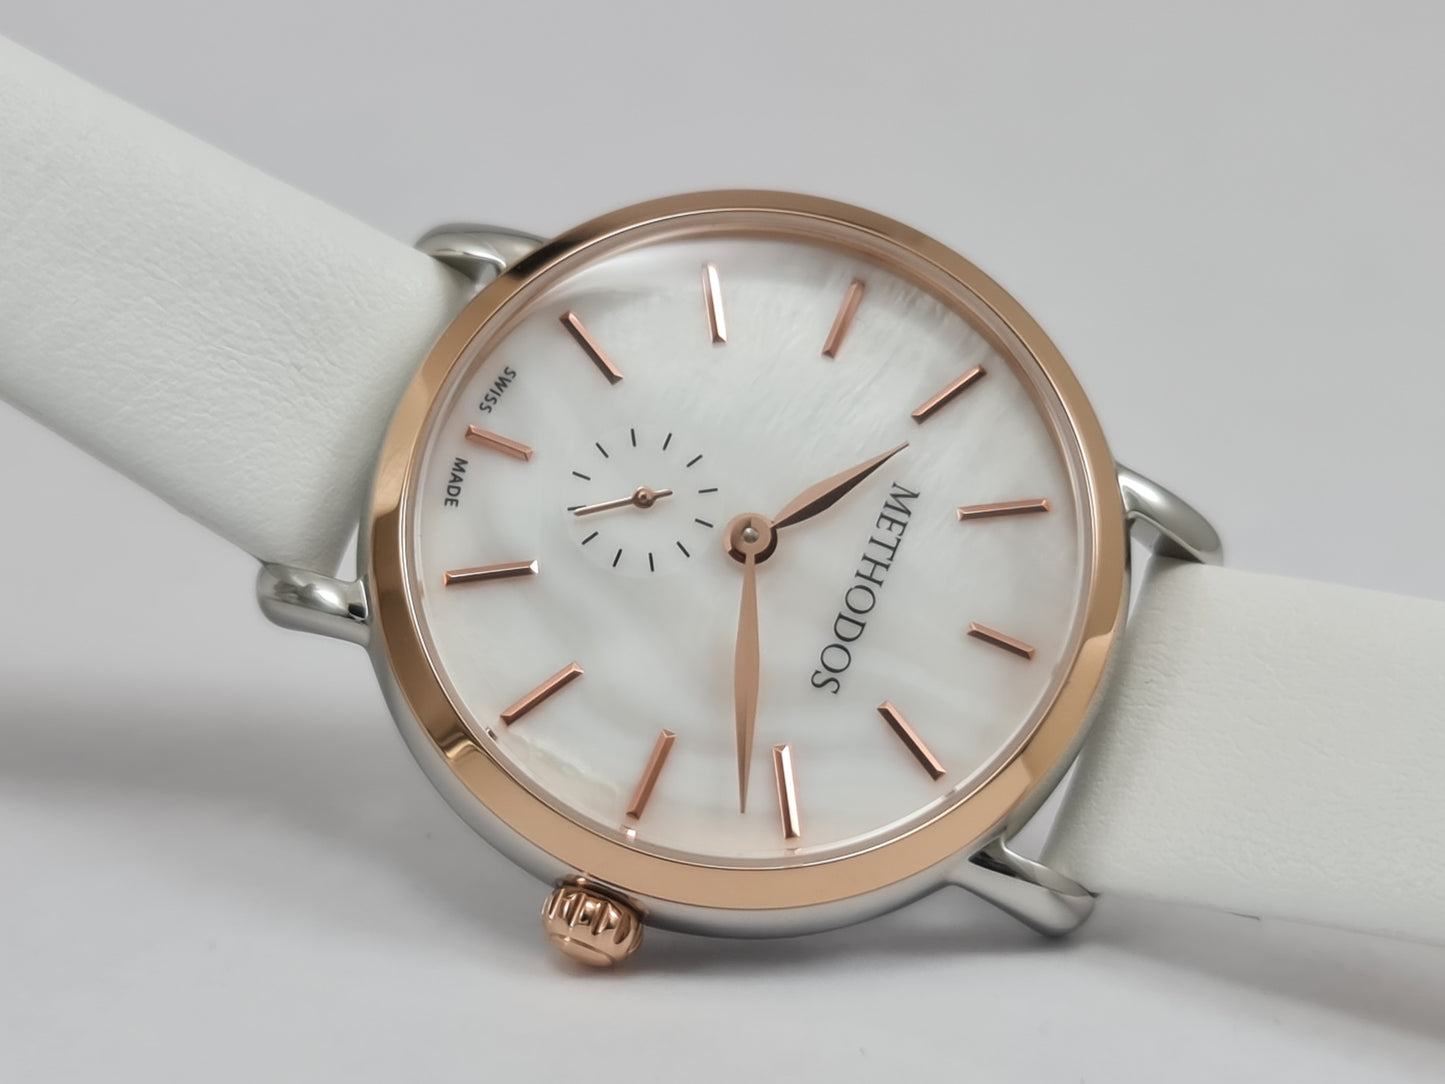 Methodos Lady Pearl – Steel-Rosé – Pearlescent White Dial – White Leather